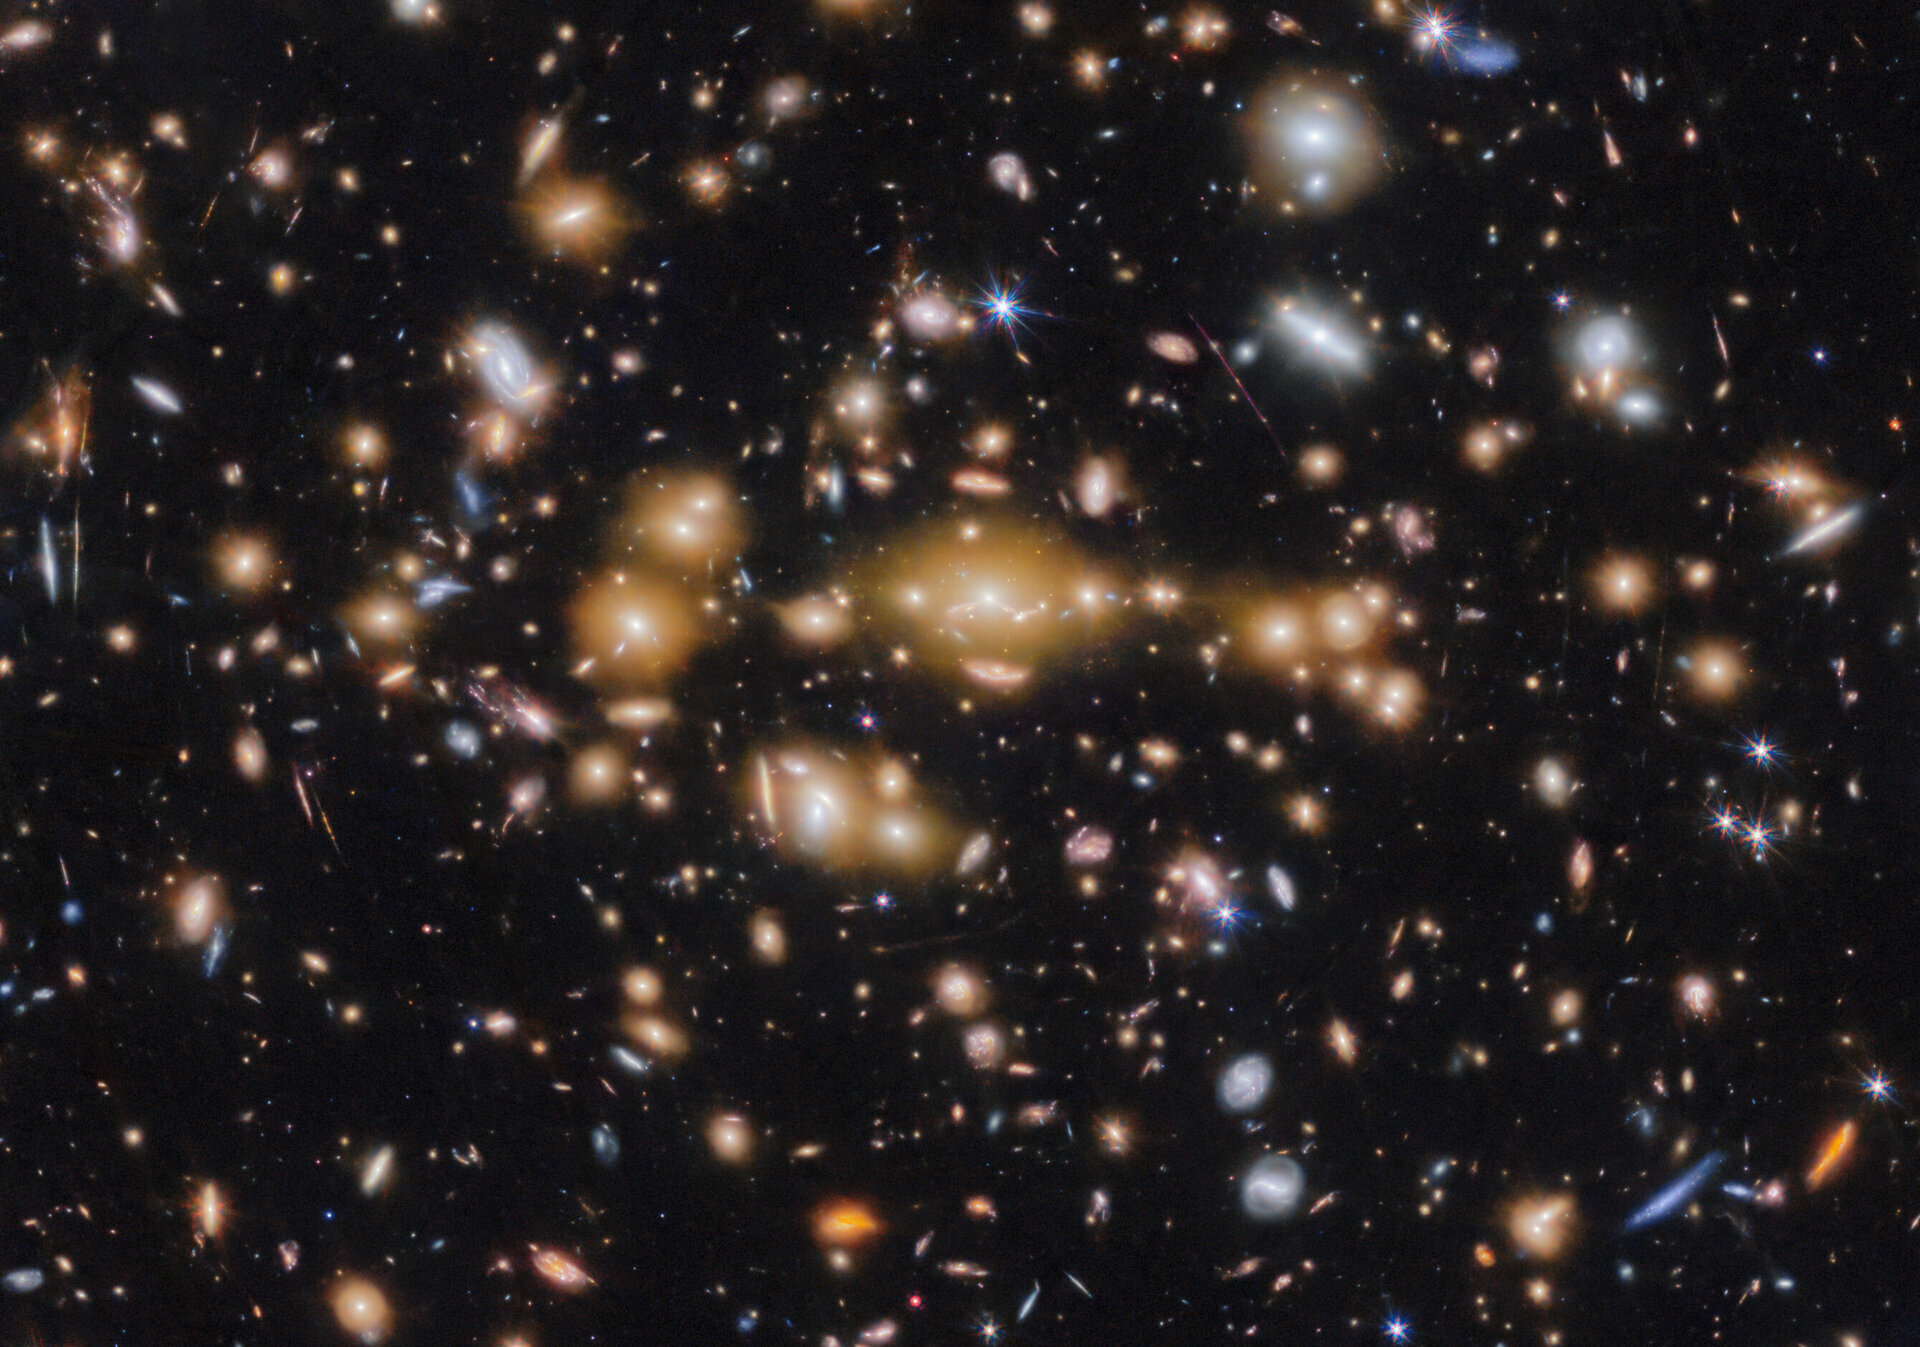 galaxy-cluster-spt-cl-j0615-5746-cropped-pillars